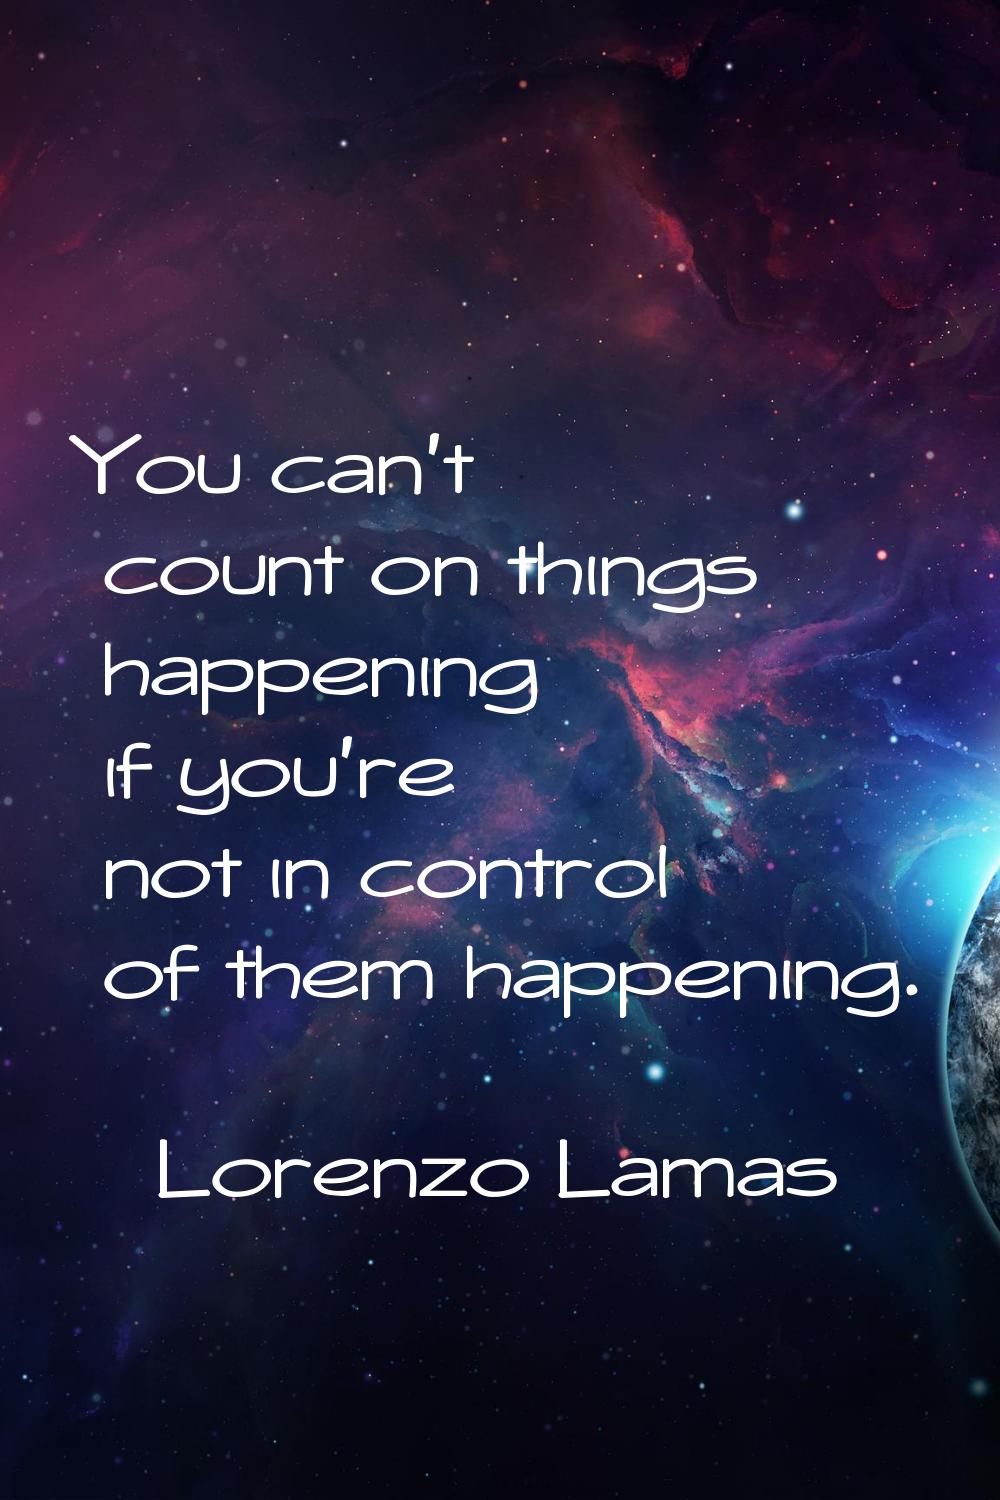 You can't count on things happening if you're not in control of them happening.